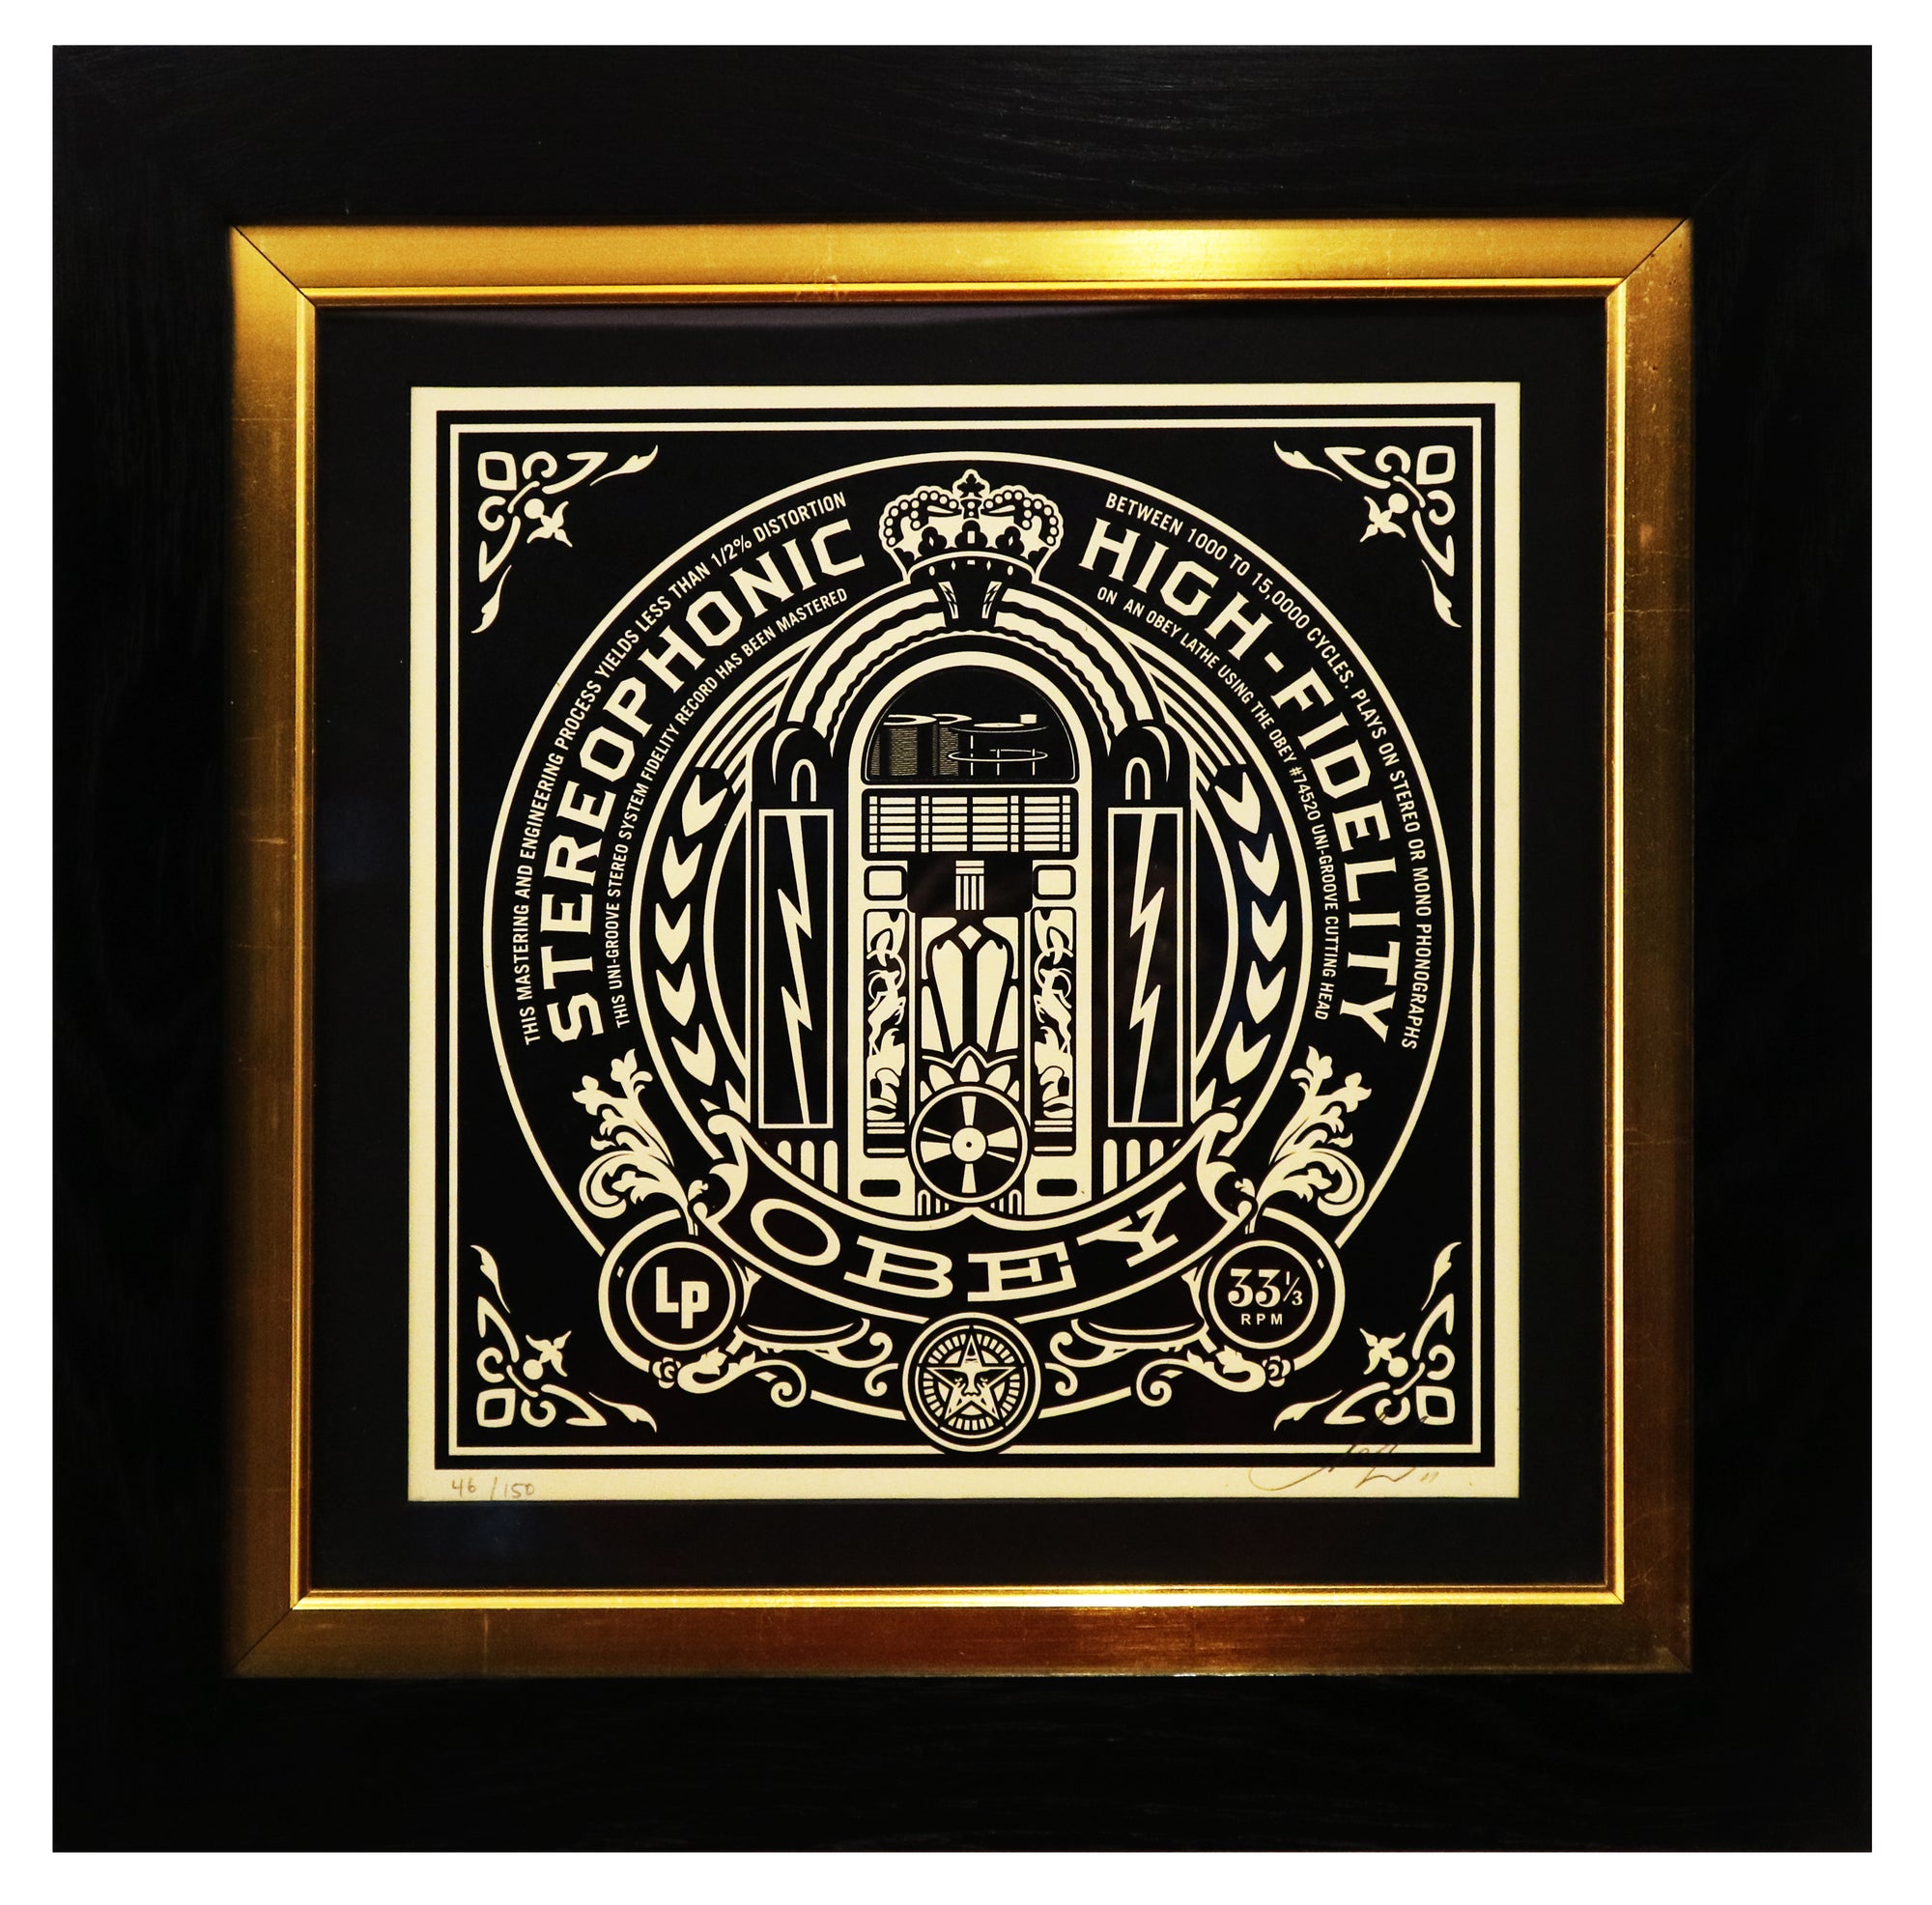 ▷ Paint it black 4/6 by Shepard Fairey (Obey), 2014, Painting